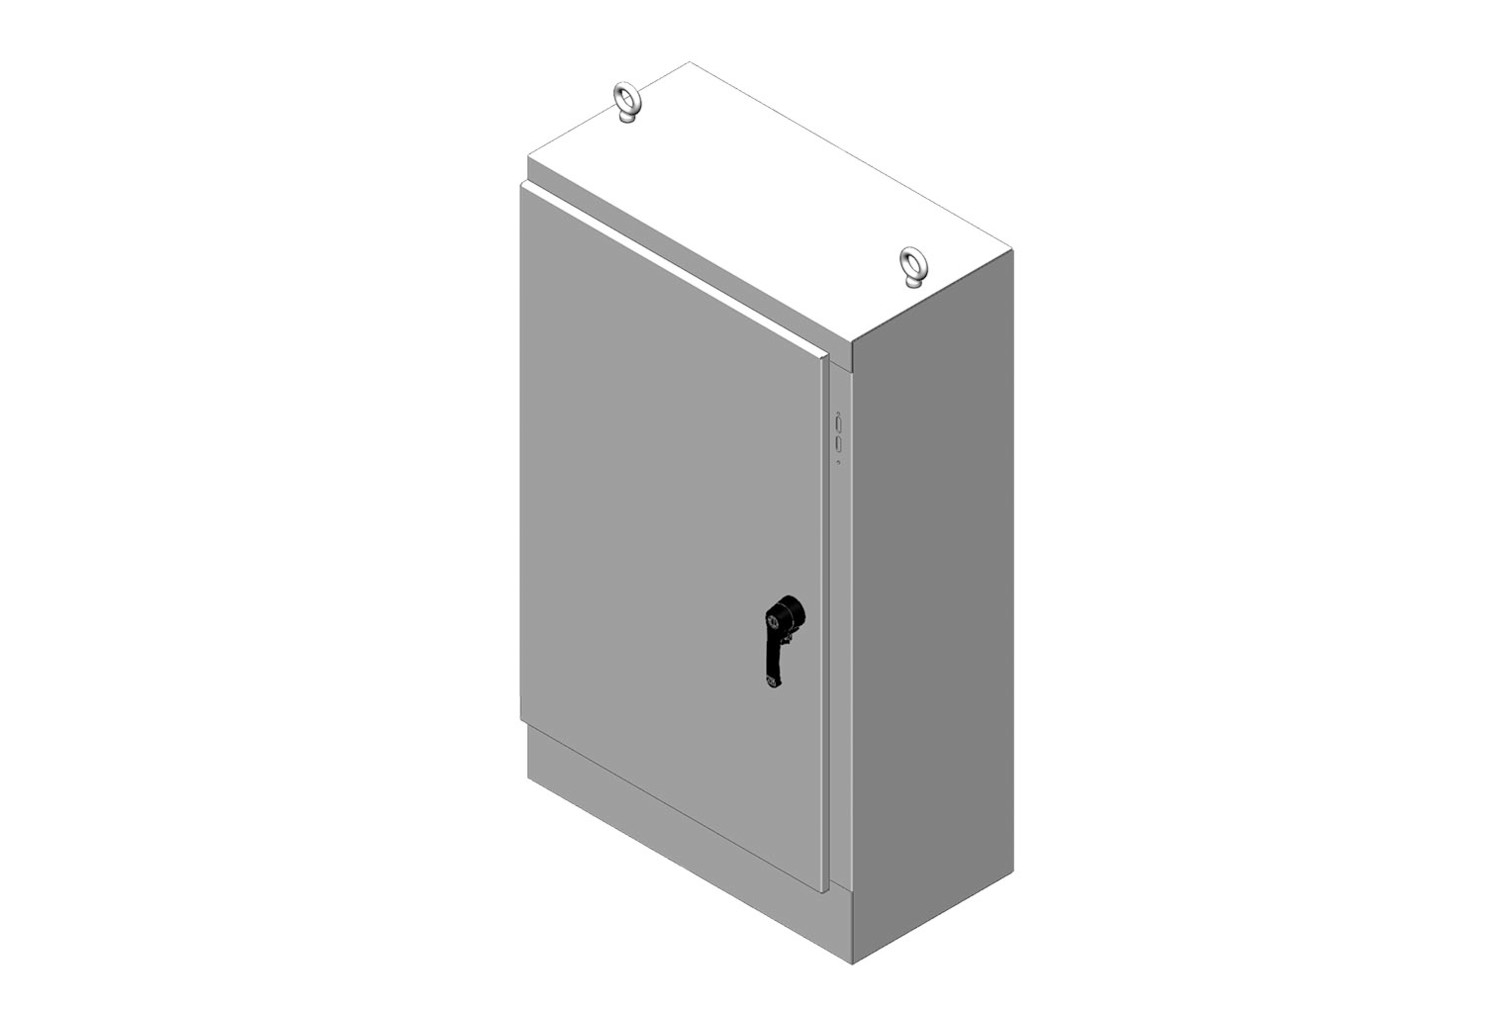 RMR Free-Standing Disconnect Enclosure, Type 4, with Solid Single Door - Image 1